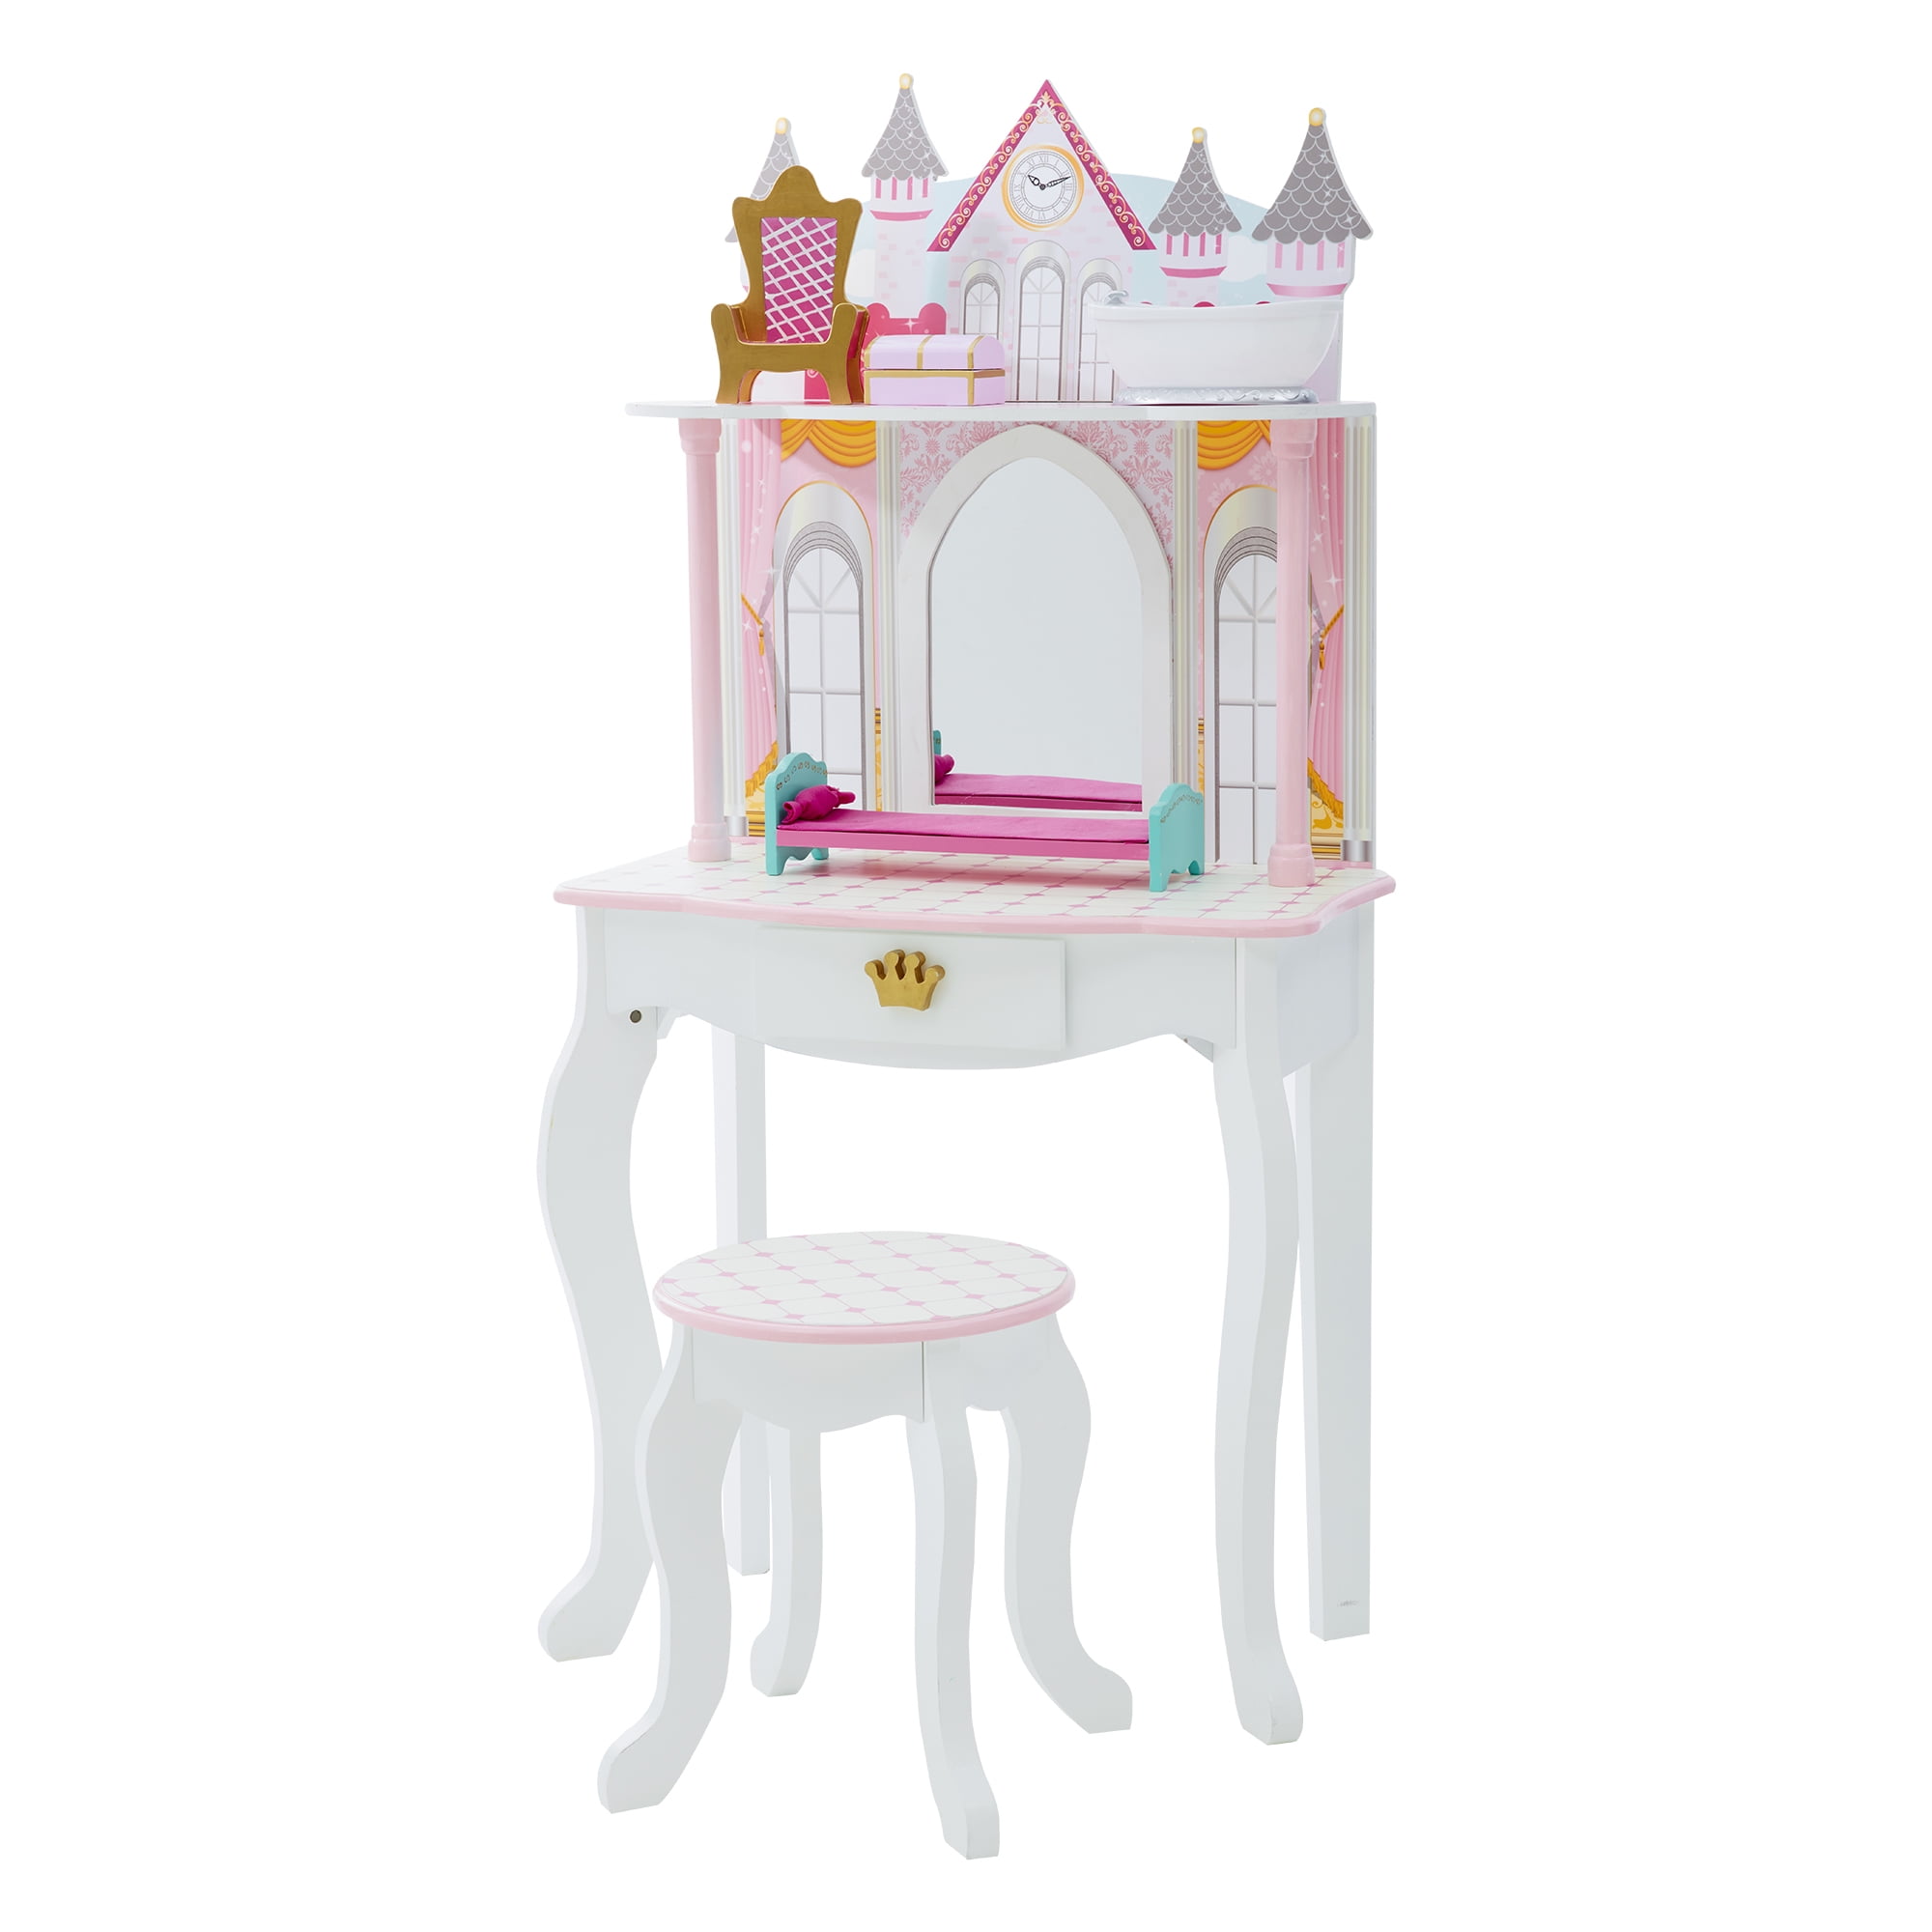 Magical Snow Castle Play Set Makeup Pretend Play Kids Vanity Table and Chair 